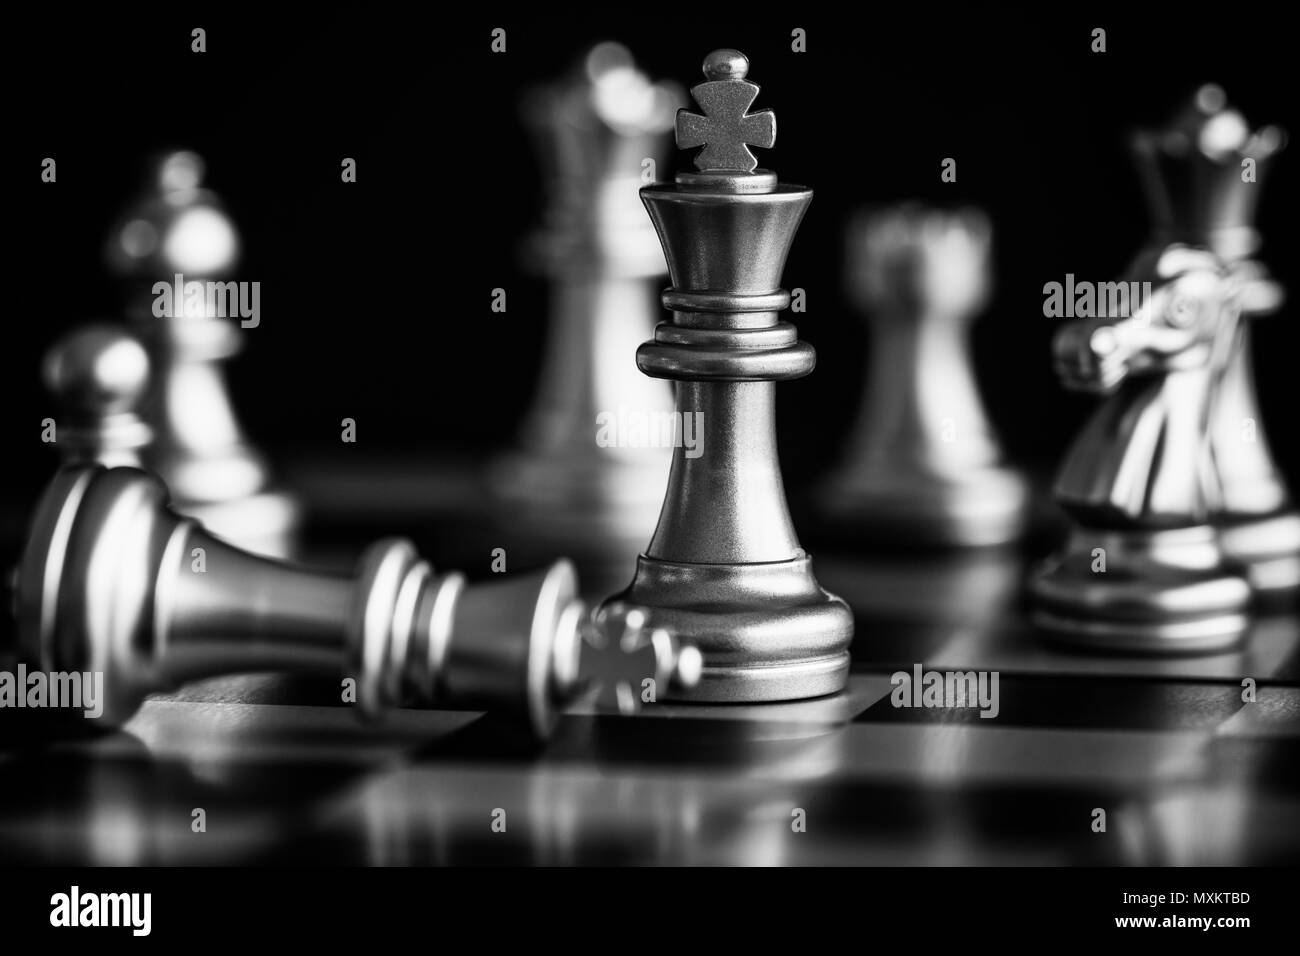 The King in battle chess game stand on chessboard with black isolated background. Business leader concept for market target strategy. Intelligence cha Stock Photo